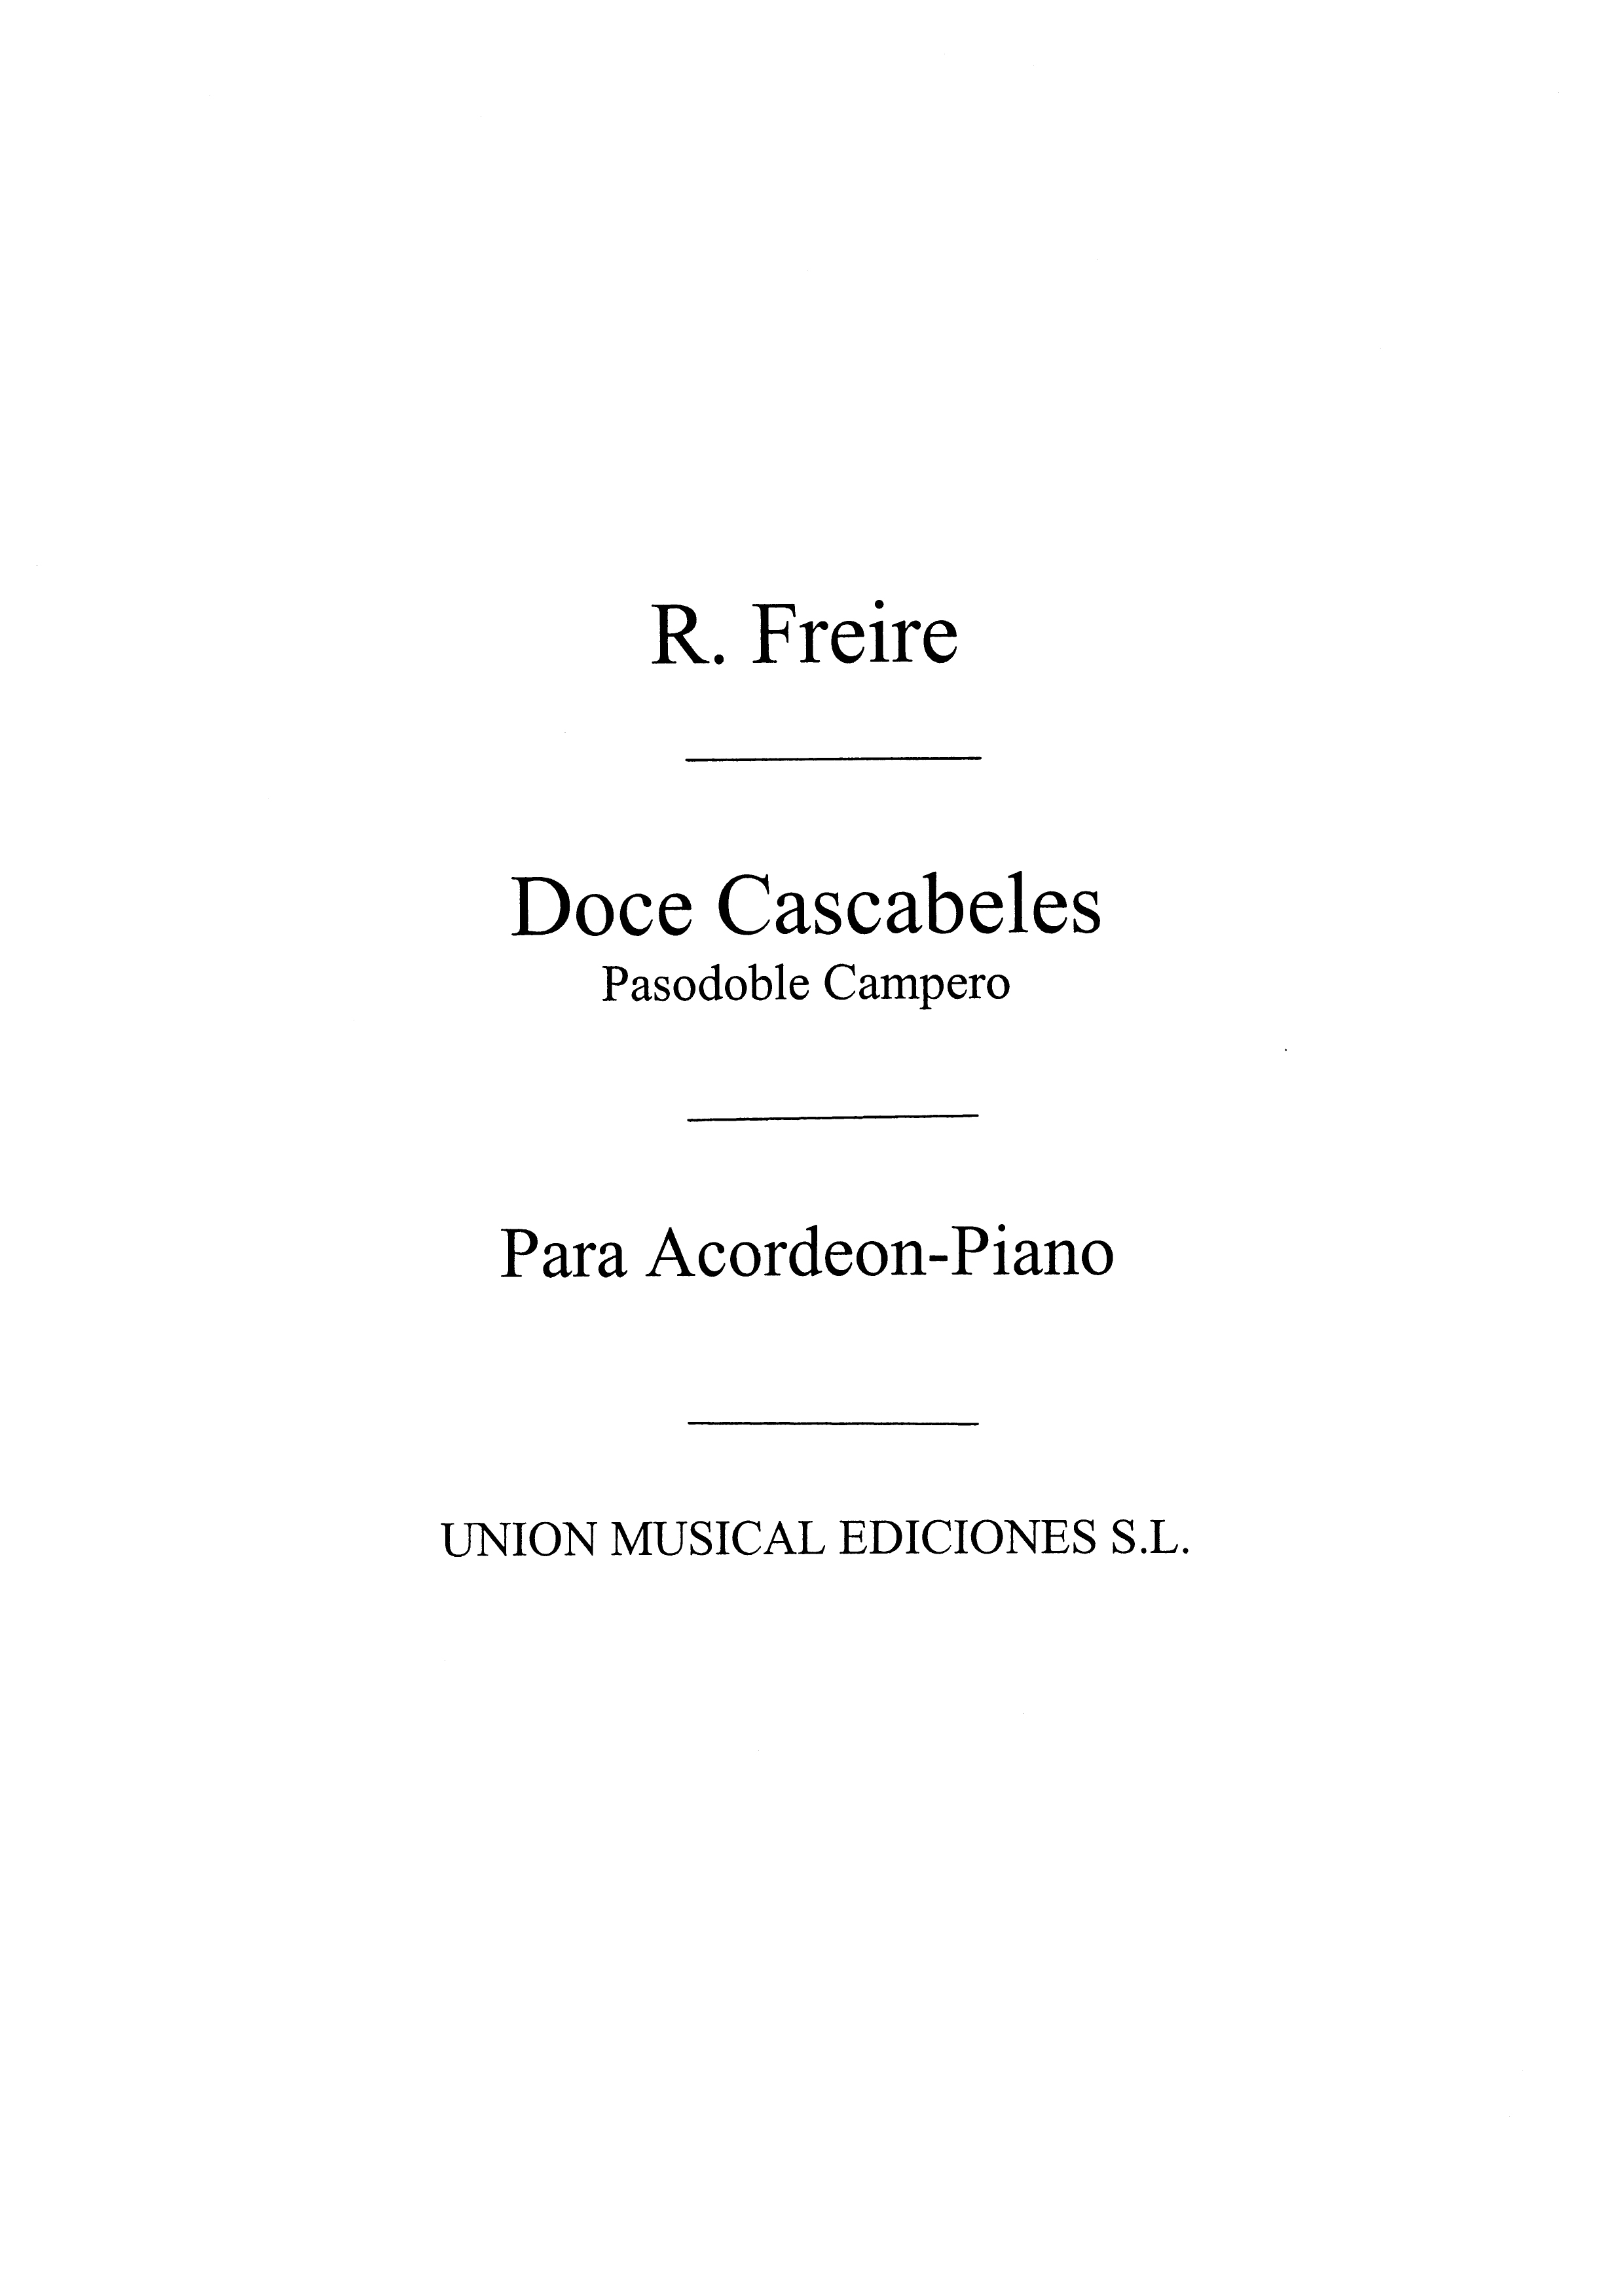 Freire: Doce Cascabeles, Pasodoble Campero (Biok) for Accordion